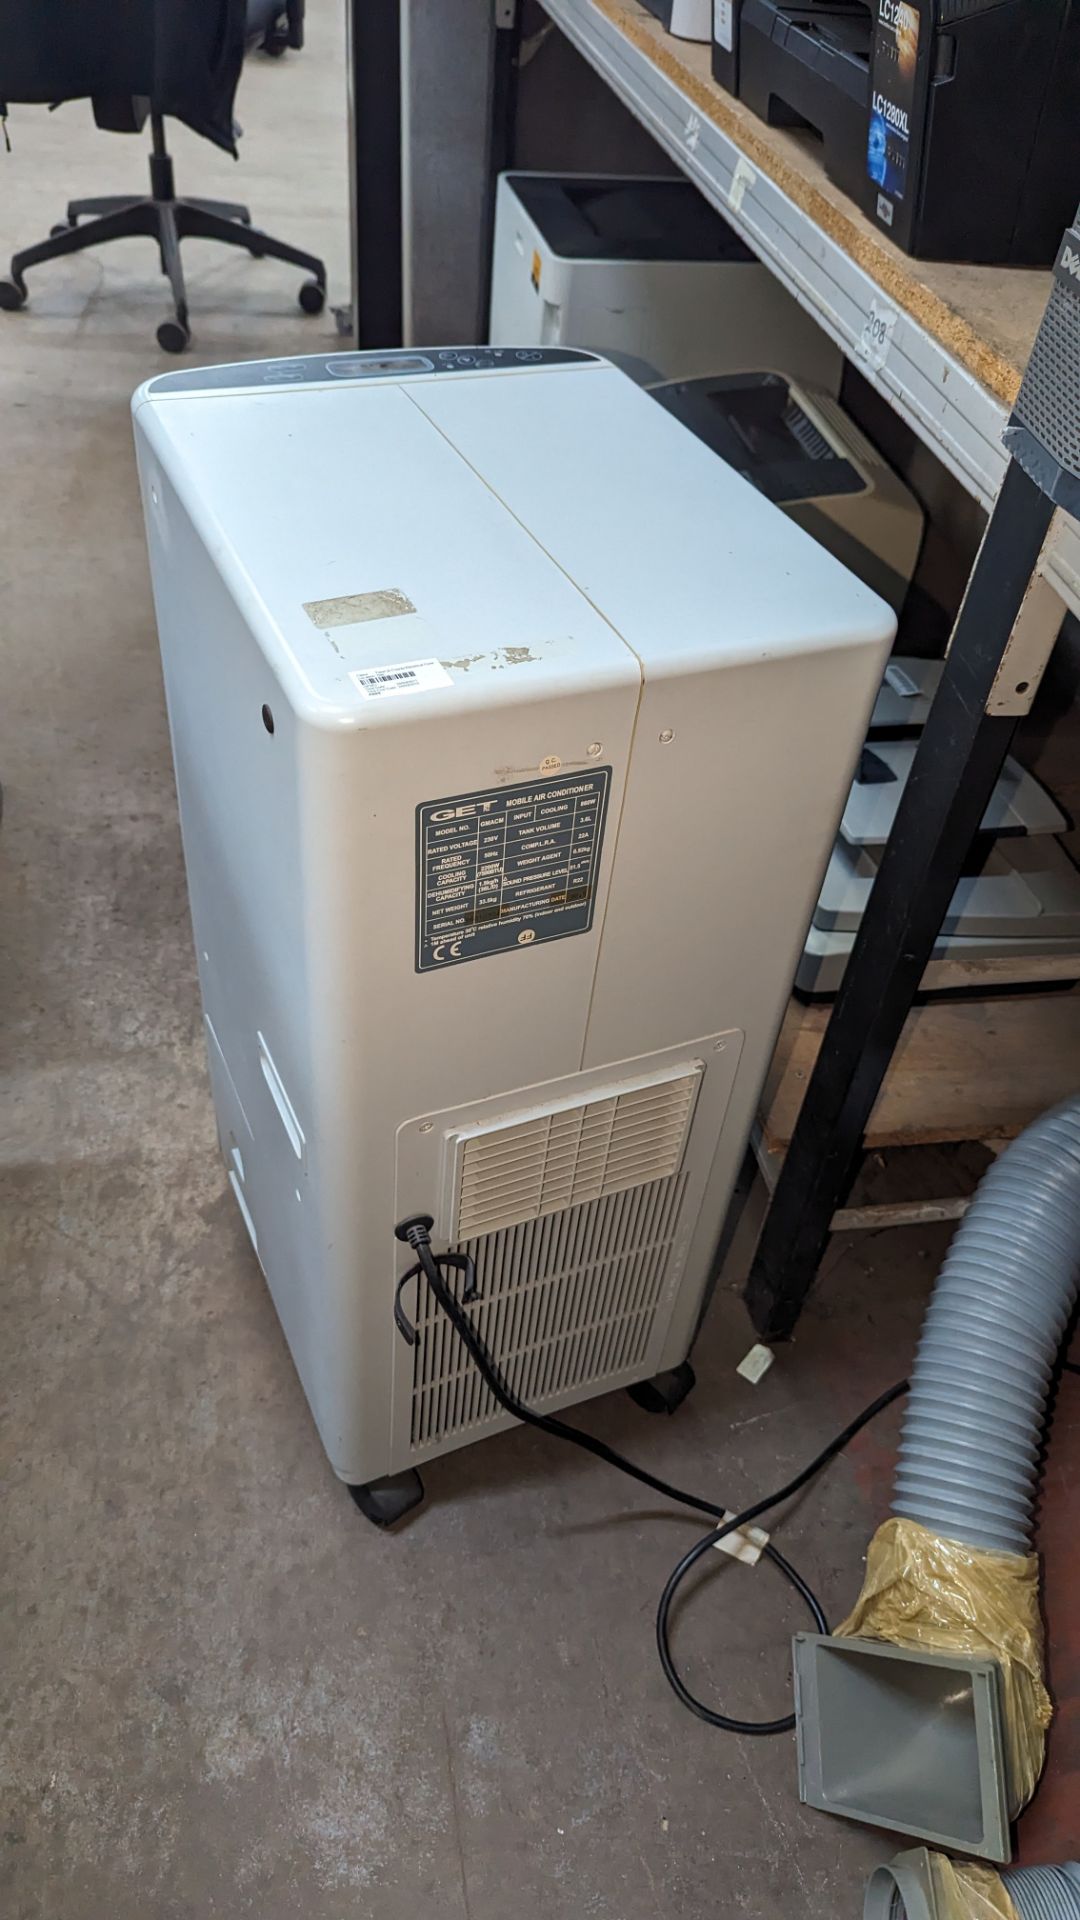 Get mobile air conditioning unit - Image 5 of 7